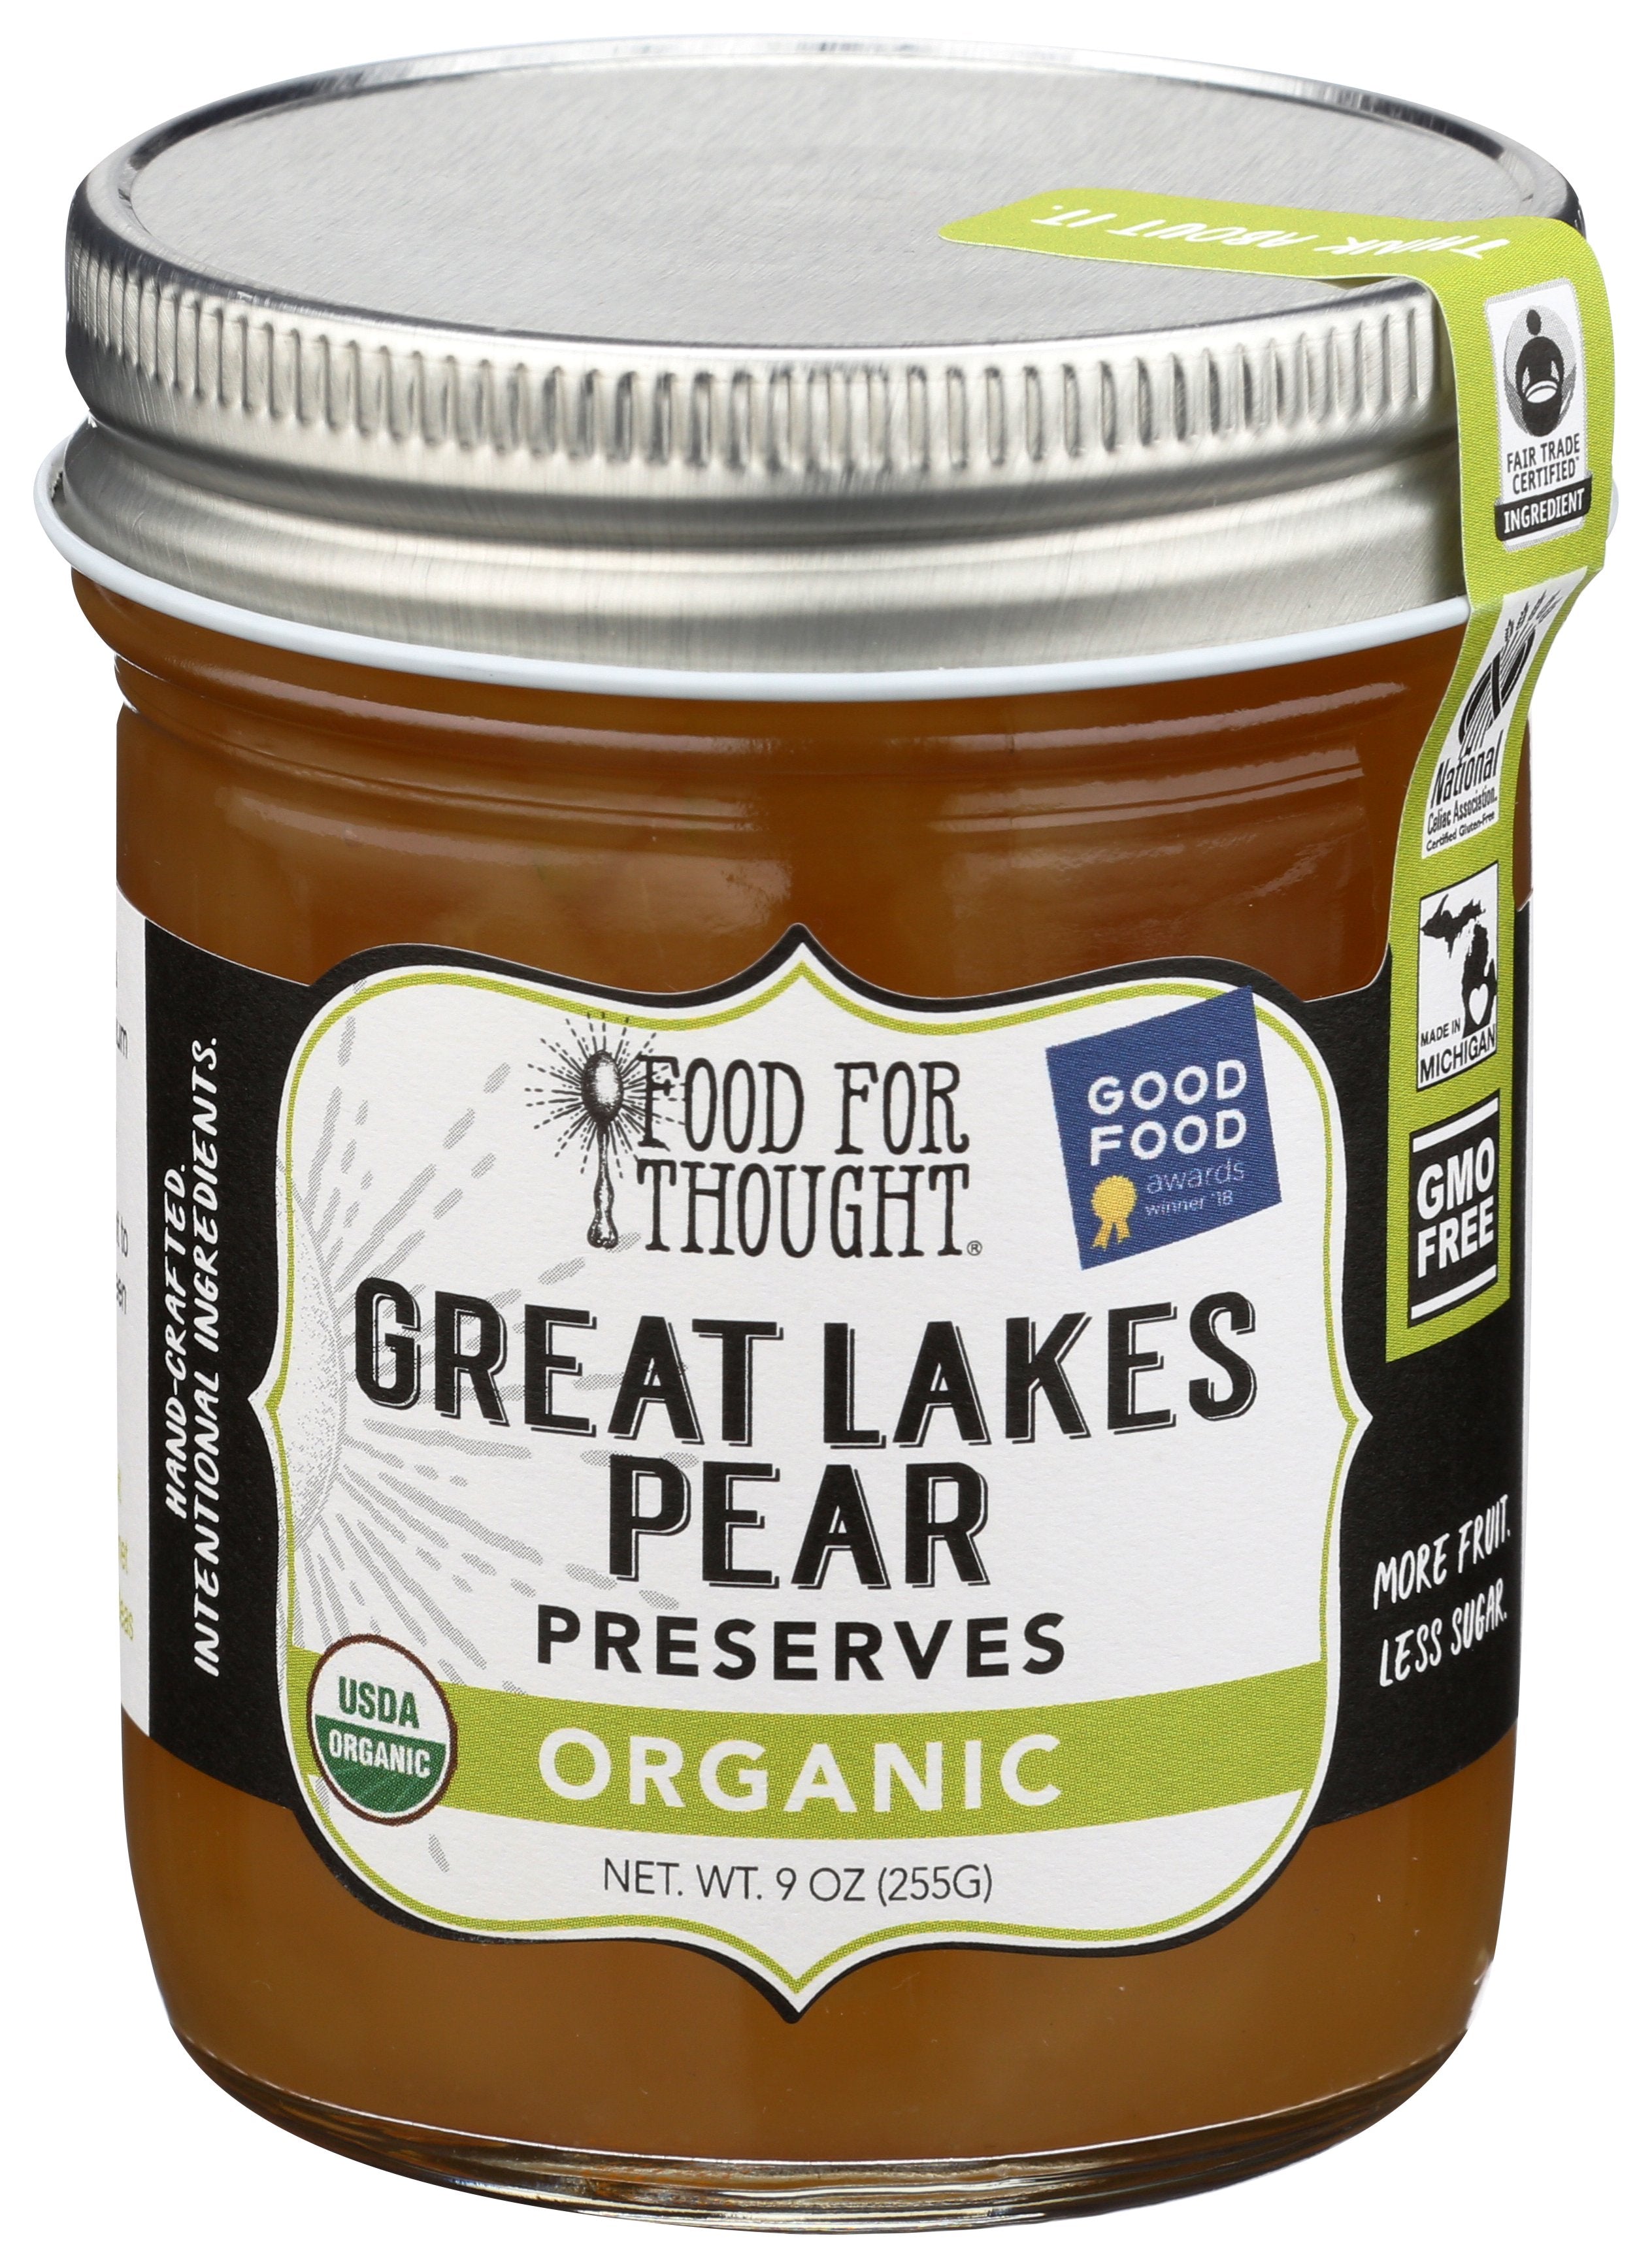 FOOD FOR THOUGHT PRESERVES PEAR ORG - Case of 6